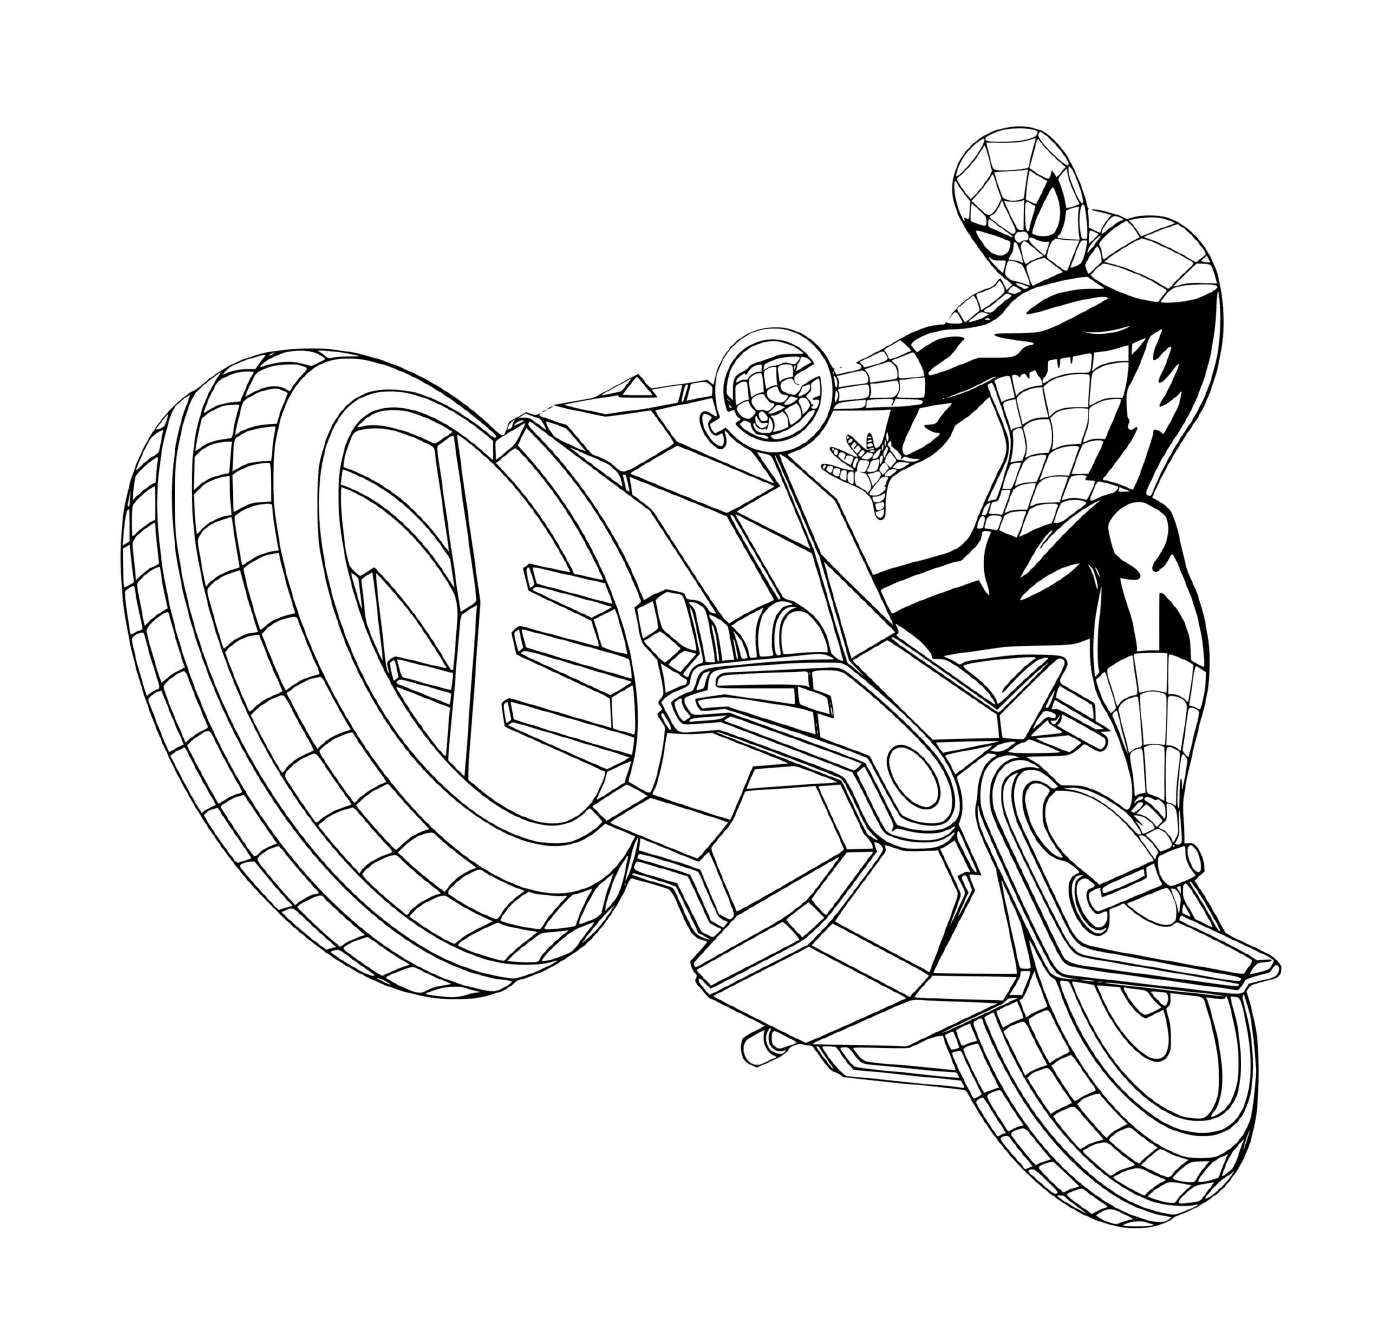  Spider-Man riding a motorcycle 